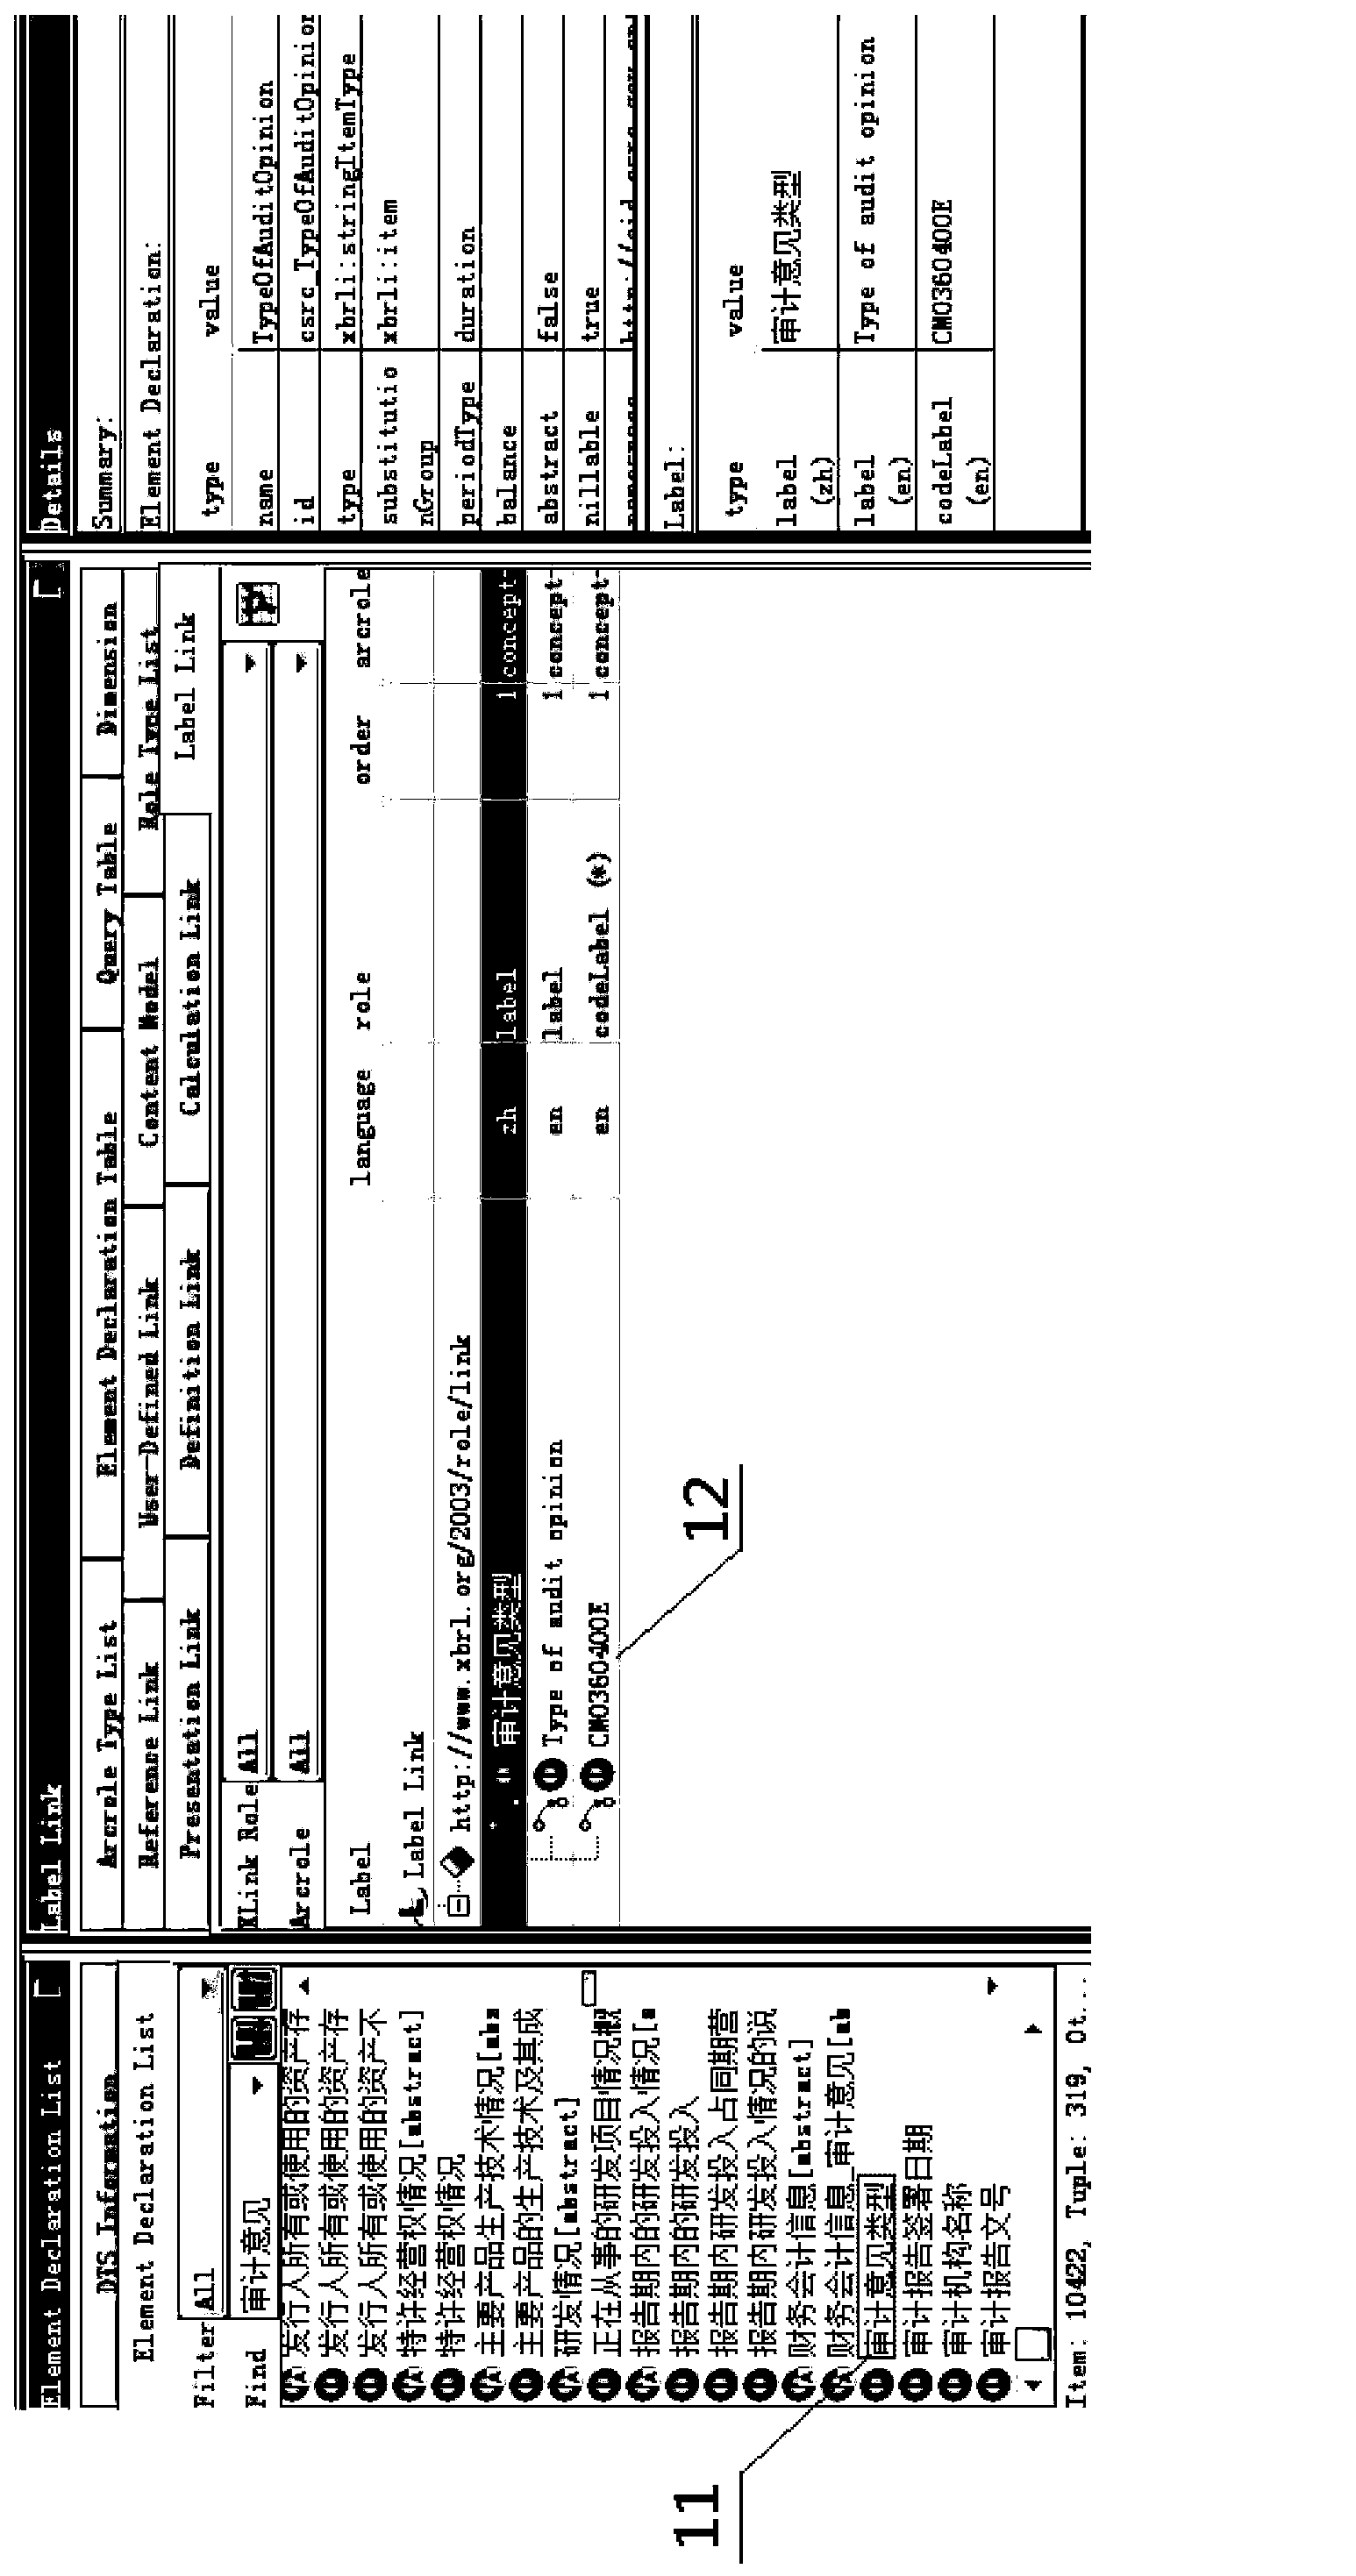 Method for coding XBRL (extensible business reporting language) elements